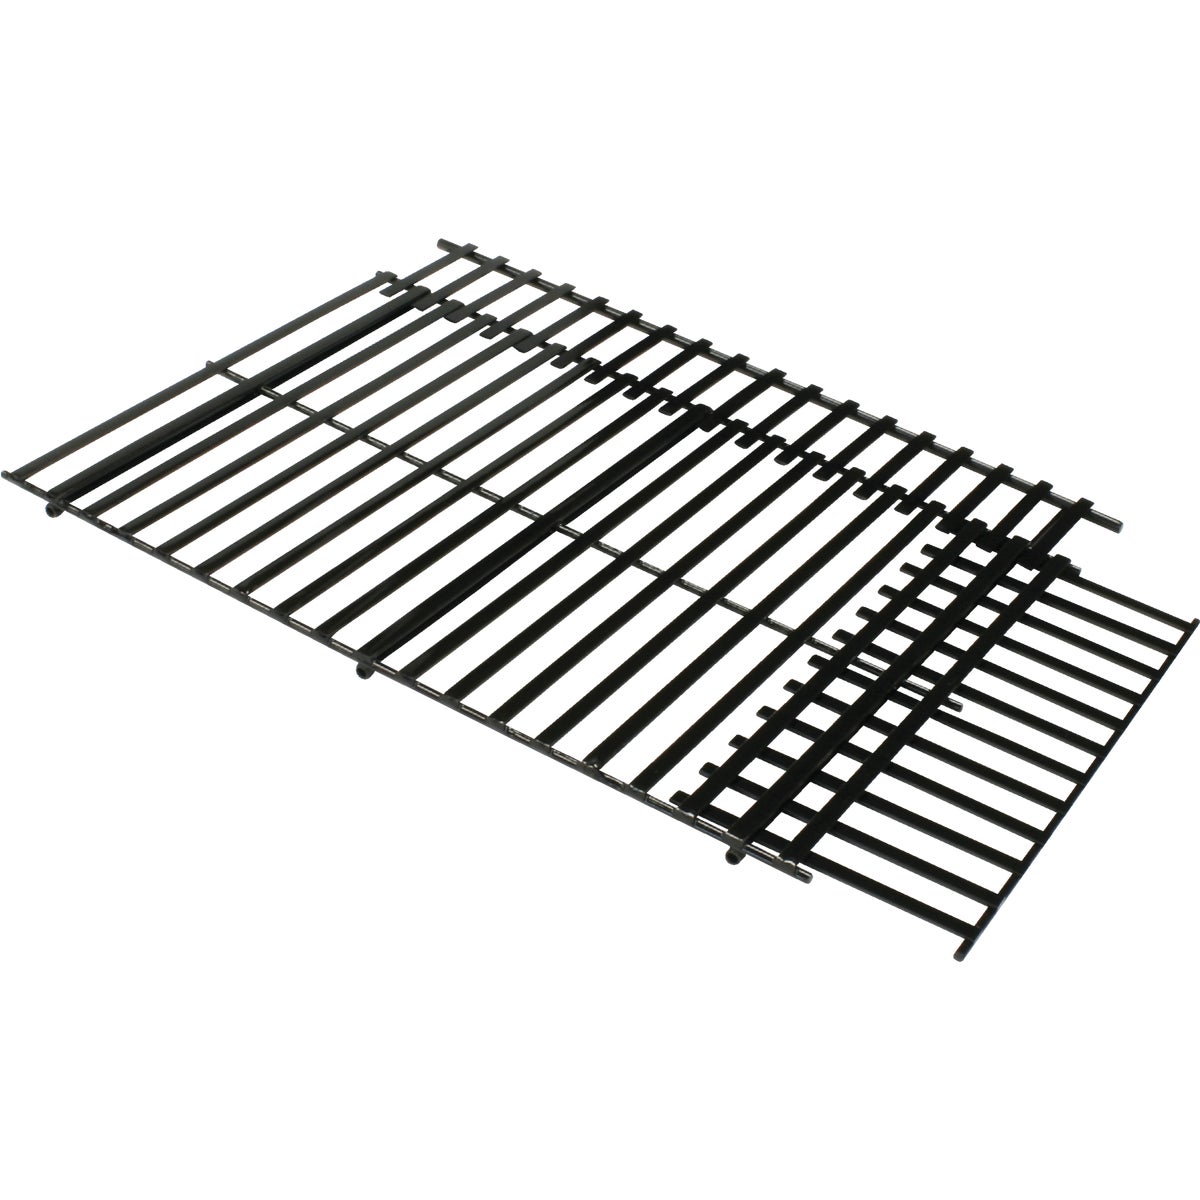 GrillPro 21-1/2 In. to 24-1/2 In. W. x 13-1/2 In. to 16-1/2 In. D. Porcelain-Coated Steel Universal Adjustable Grill Grate